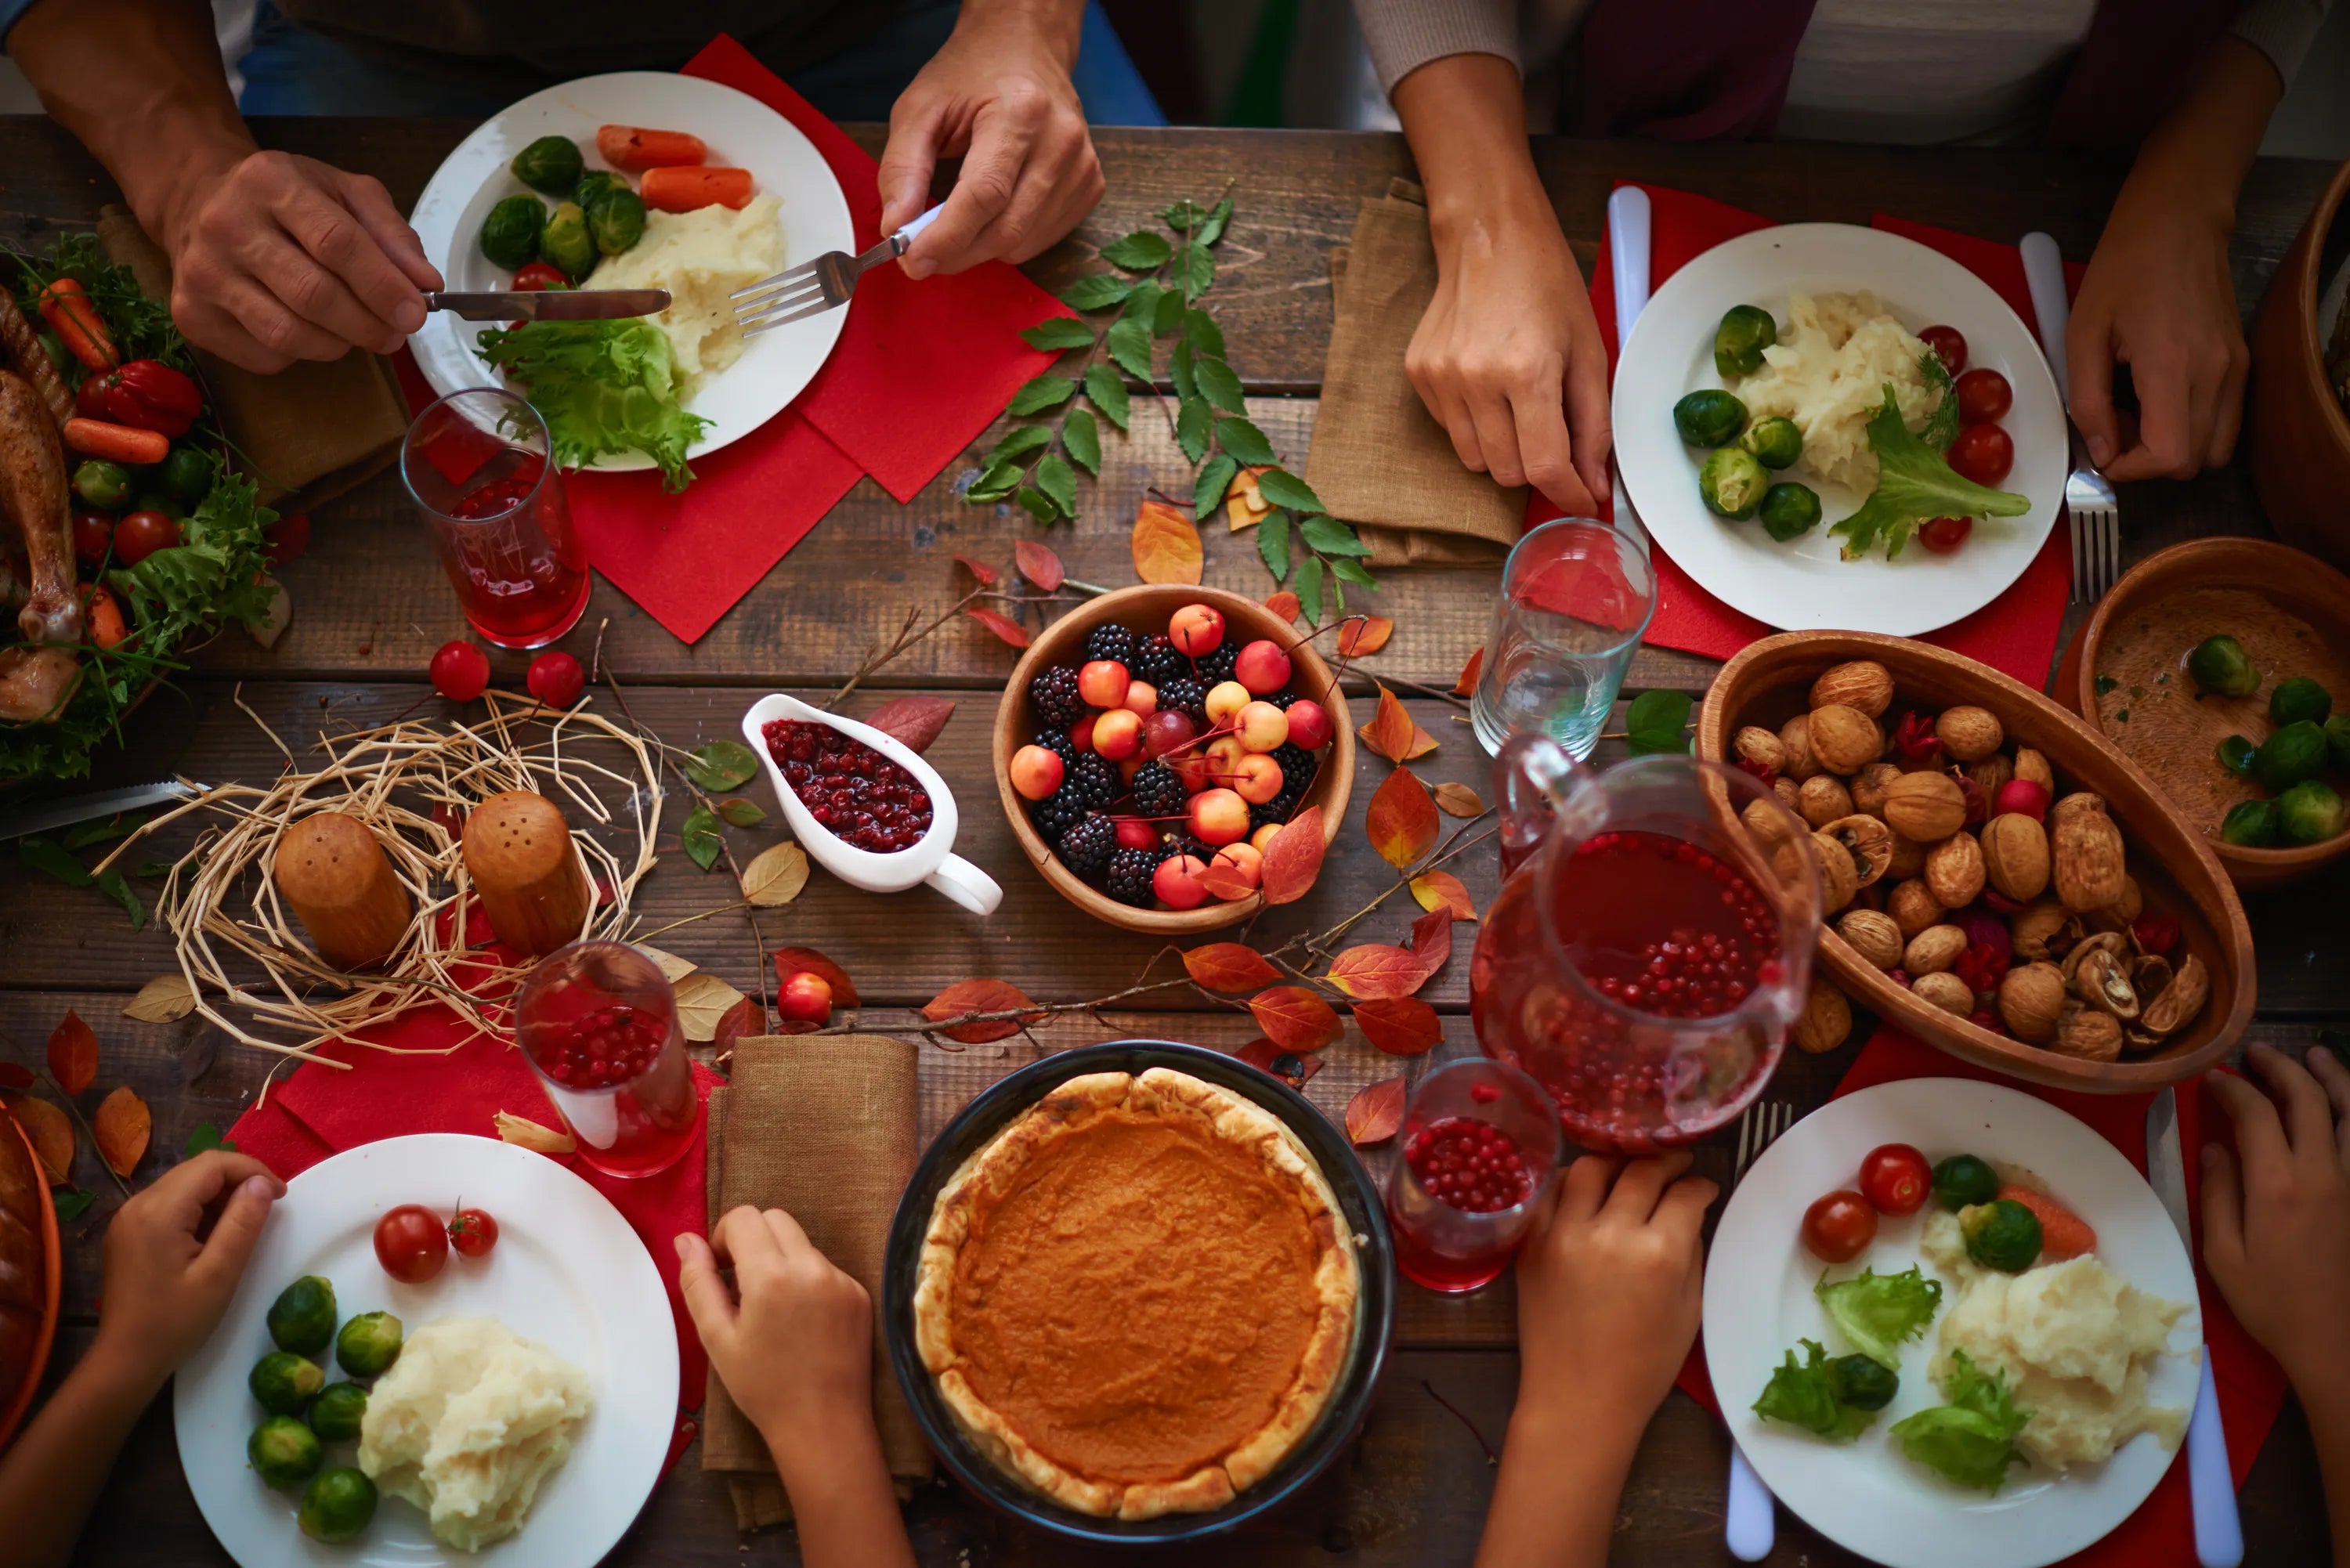 Simple Strategies to Stay Healthy During the Holidays